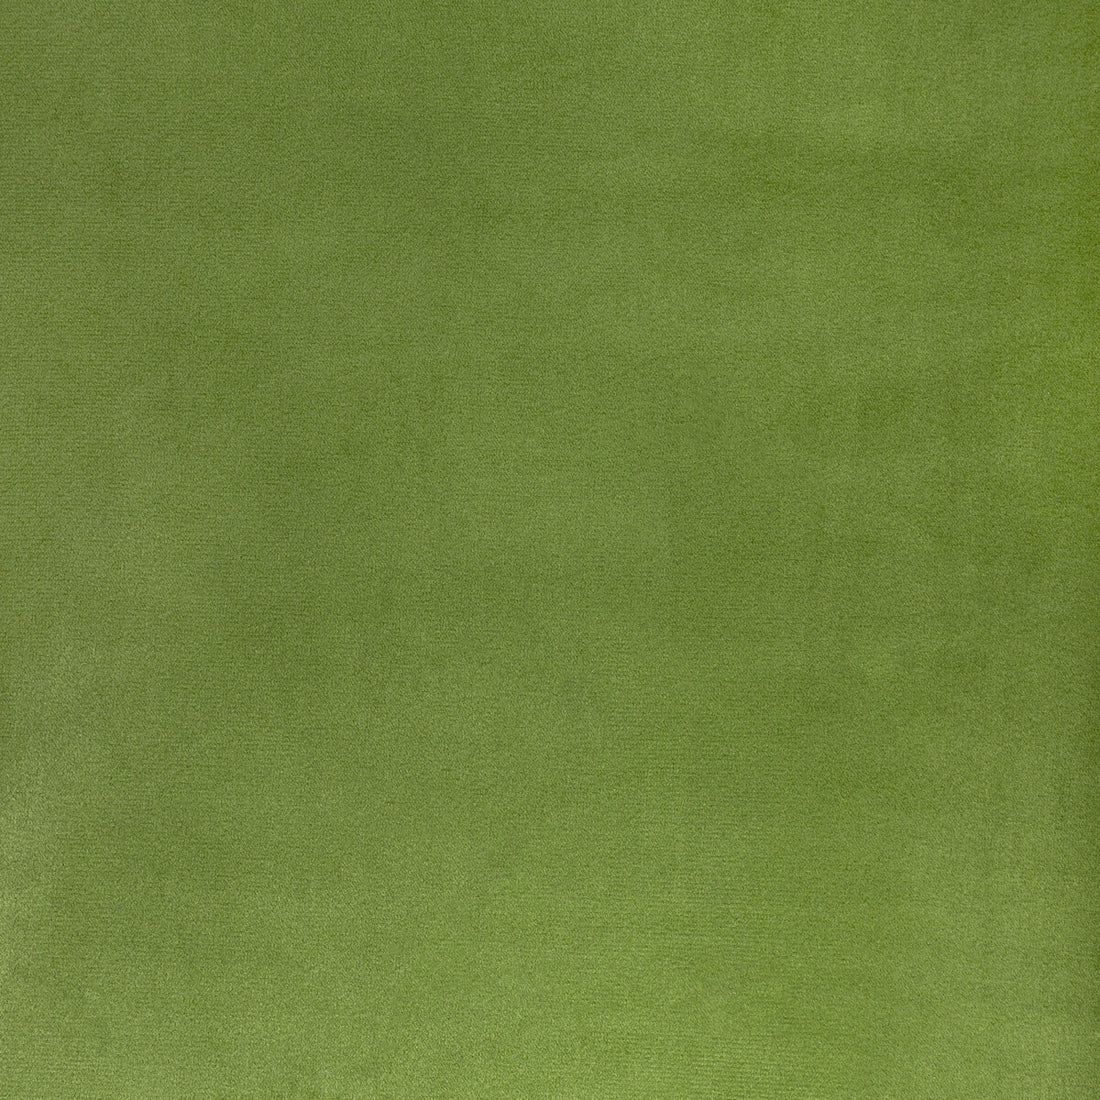 Rocco Velvet fabric in cactus color - pattern KW-10065.3685MGGN.0 - by Kravet Contract